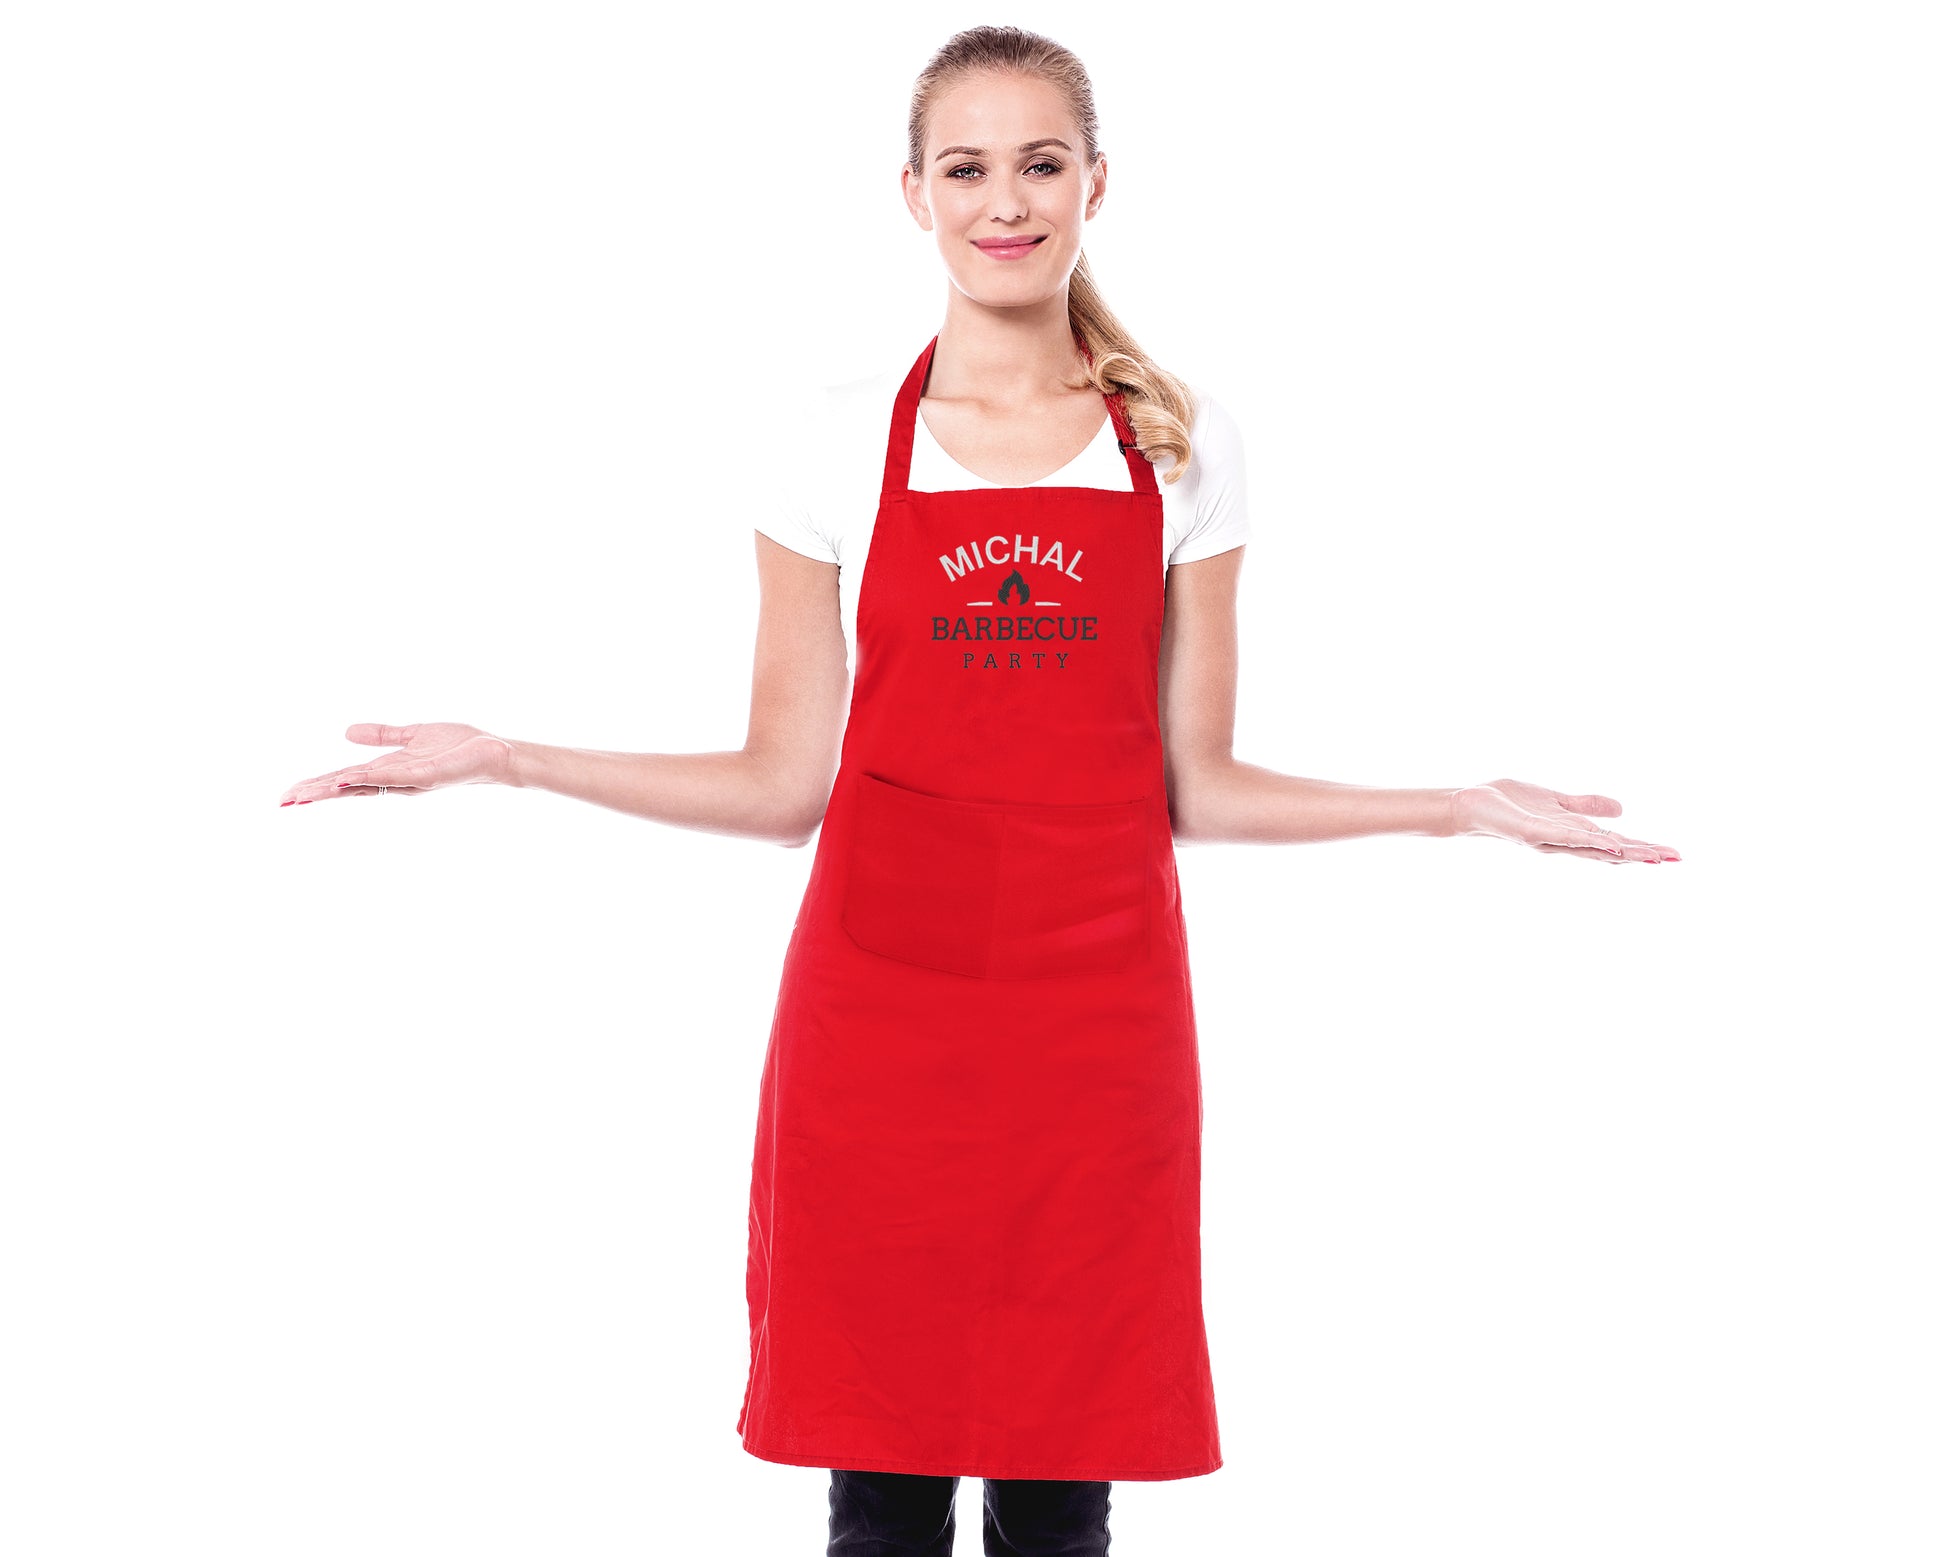 Barbecue Embroidered Personalised Apron - Sugar Gecko